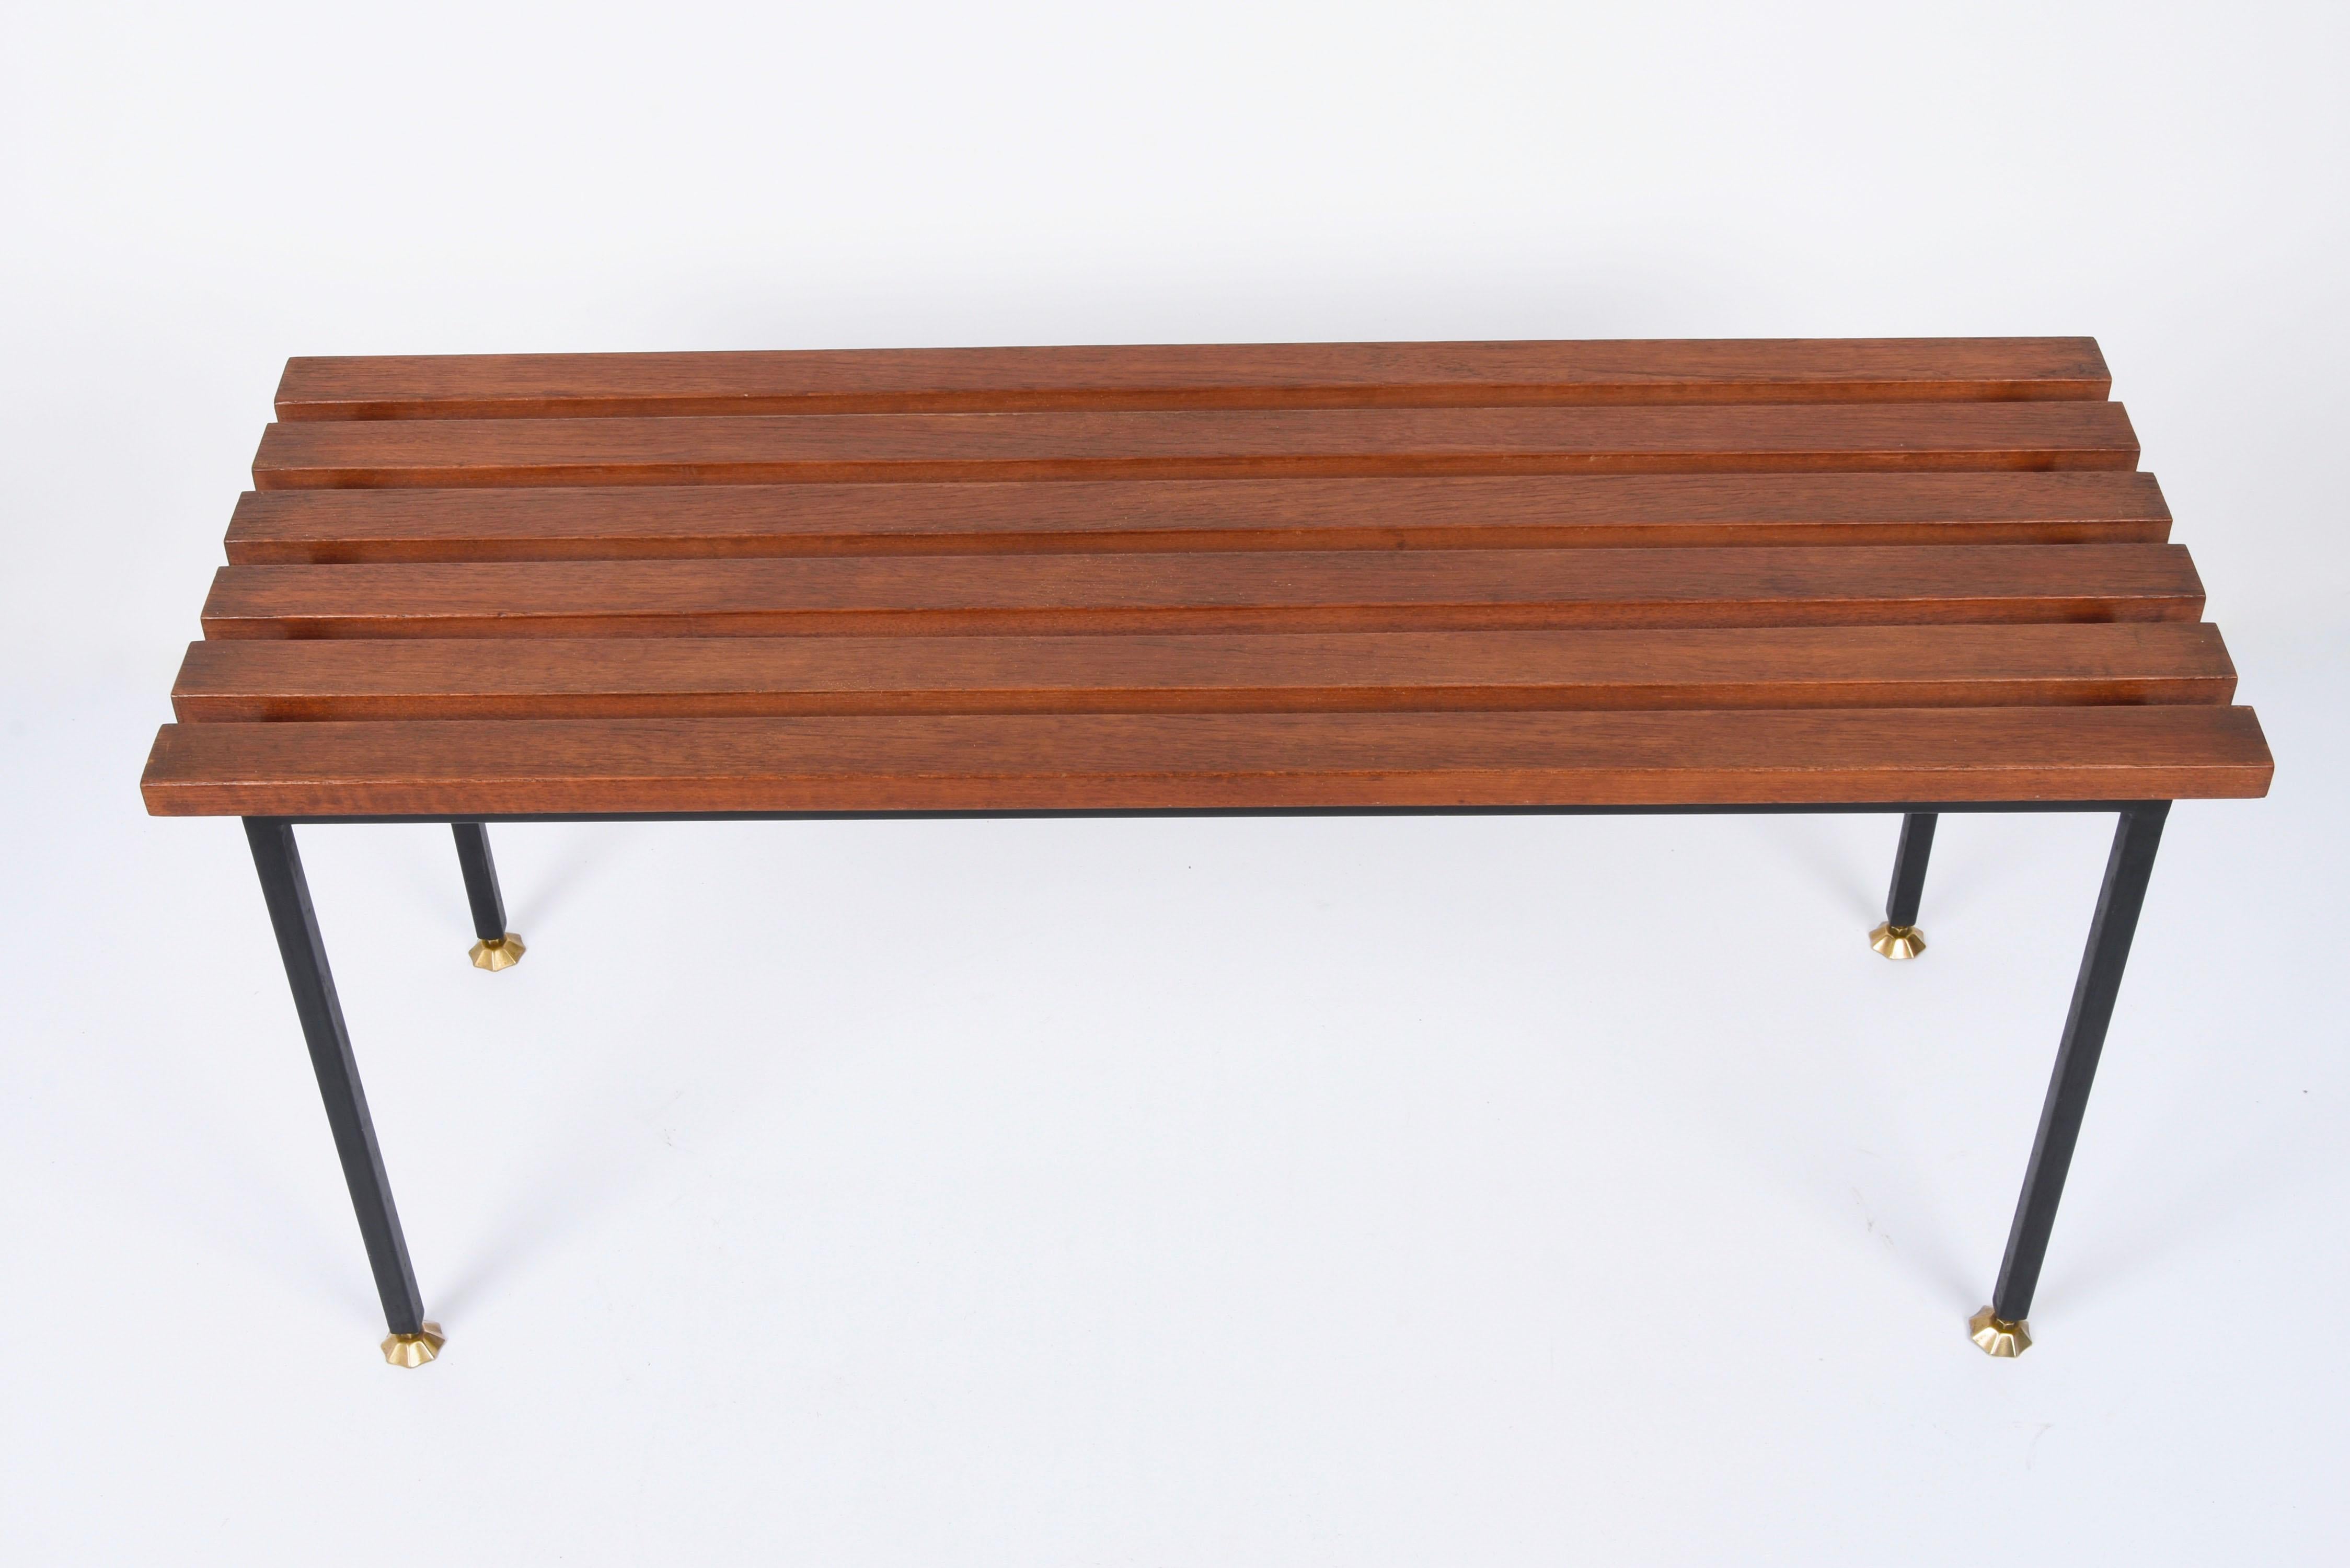 Wrought Iron Midcentury Teak and Black Enameled Metal Italian Bench with Brass Feet, 1960s For Sale